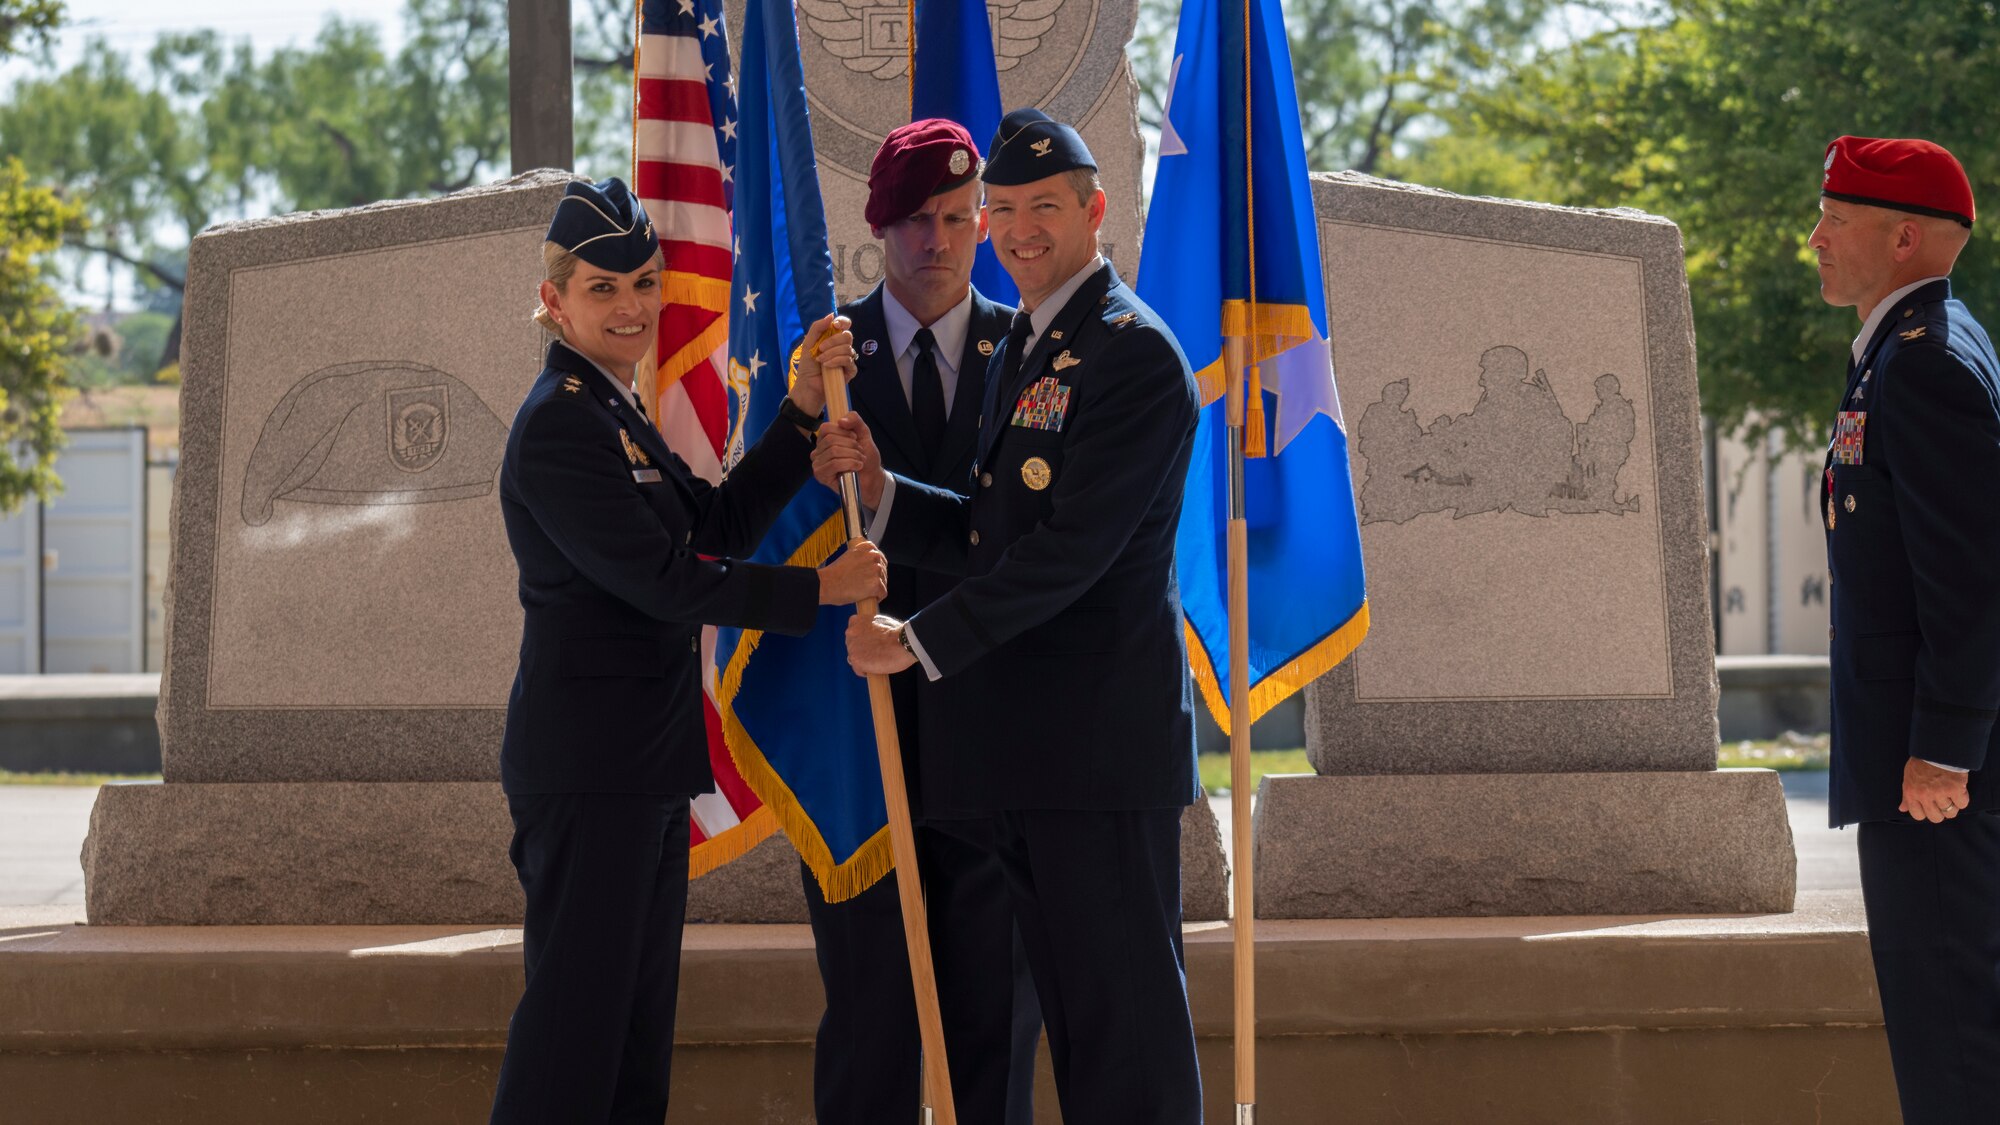 U.S. Air Force Maj. Gen. Michele Edmondson (left), 2nd Air Force commander and presiding officer, passes the guidon to Col. Nathan Colunga (middle), incoming Special Warfare Training Wing commander, during the SWTW change of command ceremony at Joint Base San Antonio-Chapman Training Annex, Texas, July 11, 2022. At right is Col. Mason Dula, outgoing SWTW commander.